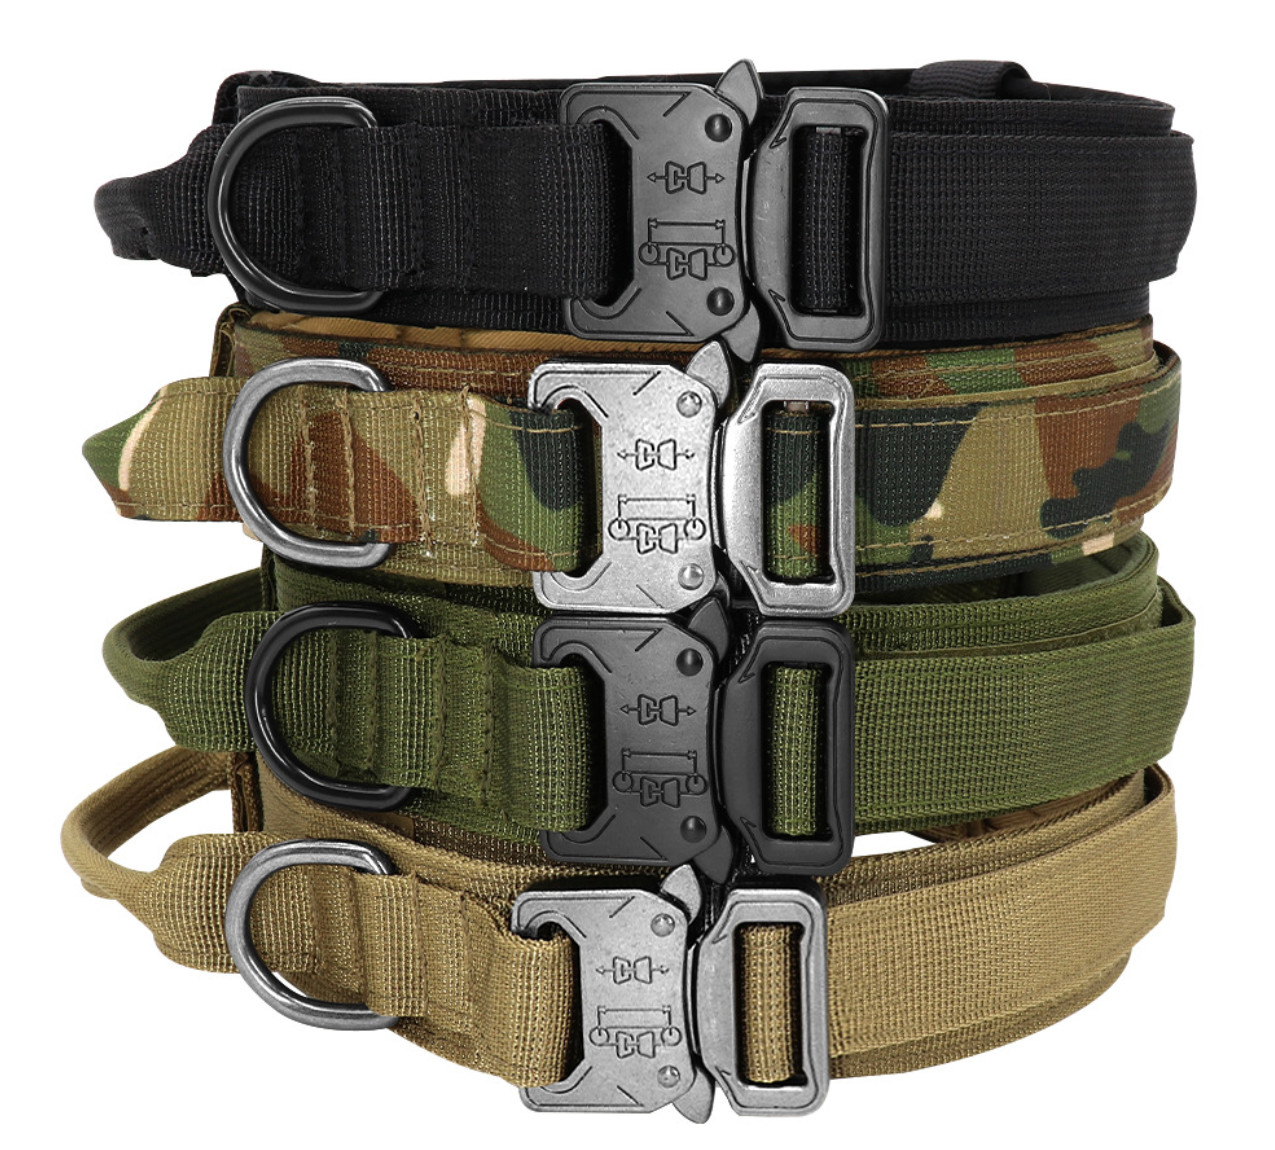  14in 1.5in Military Dog Vest Harness Tactical Training Nylon Manufactures